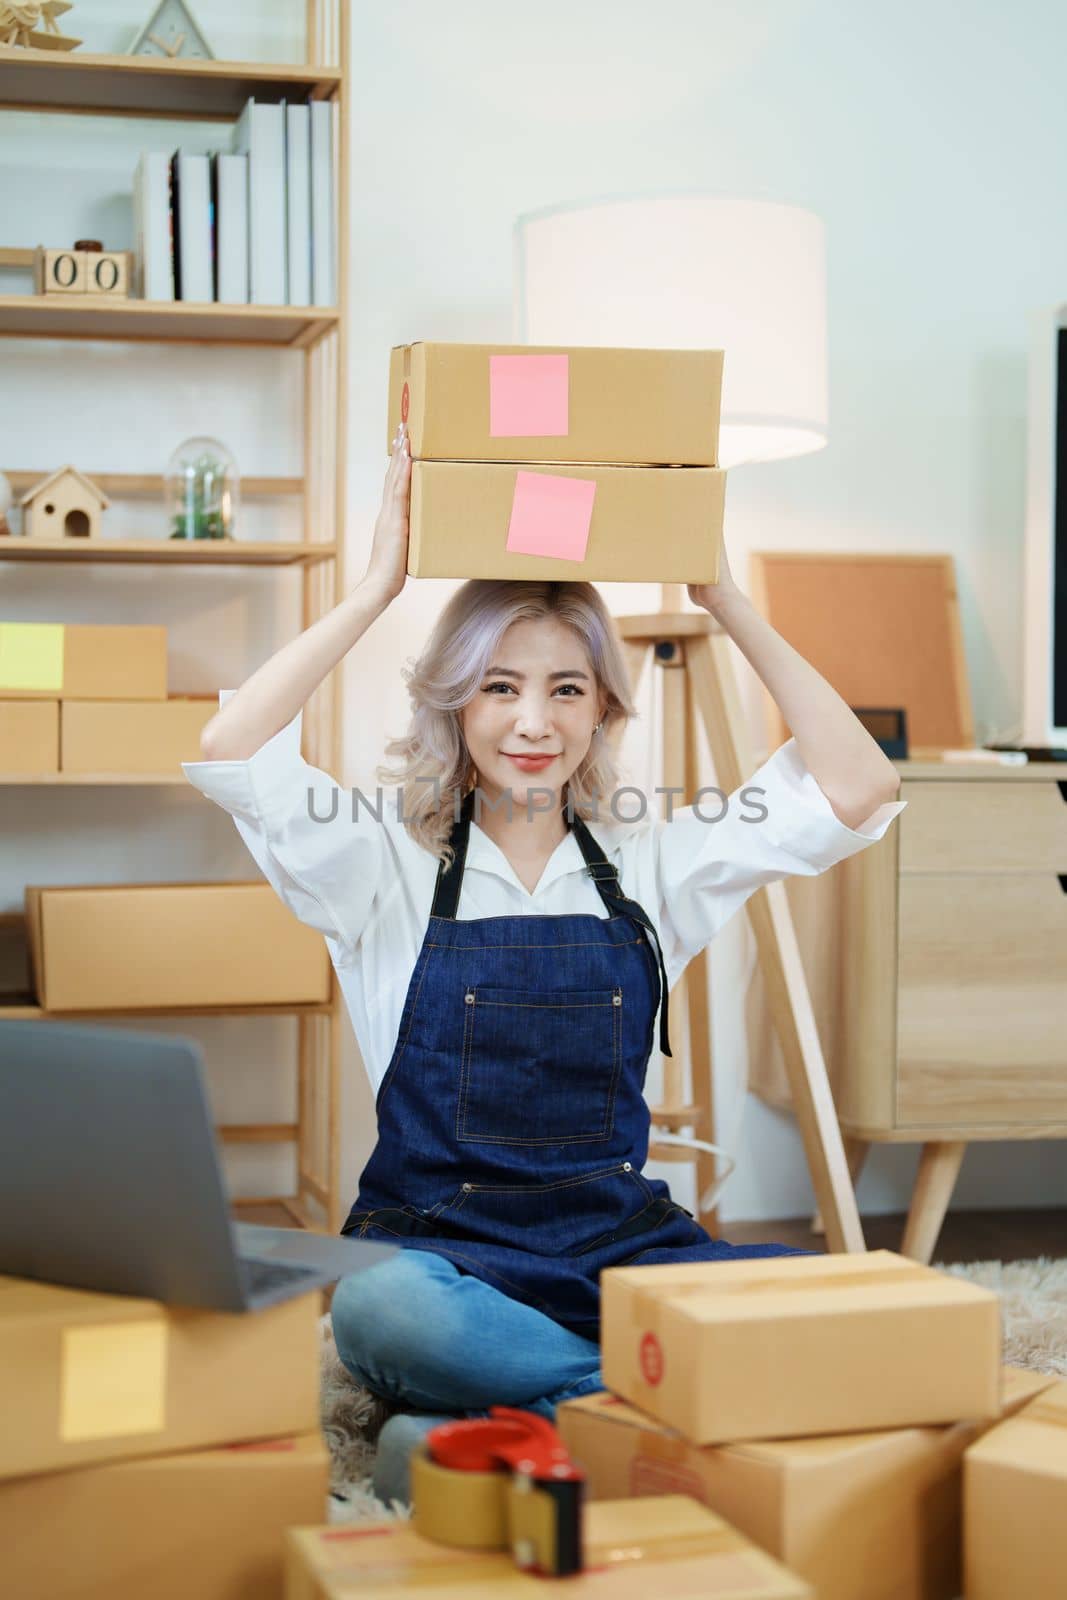 Starting small business entrepreneur of independent Asian woman smiling using computer laptop with cheerful success of online marketing package box items and SME delivery concept.